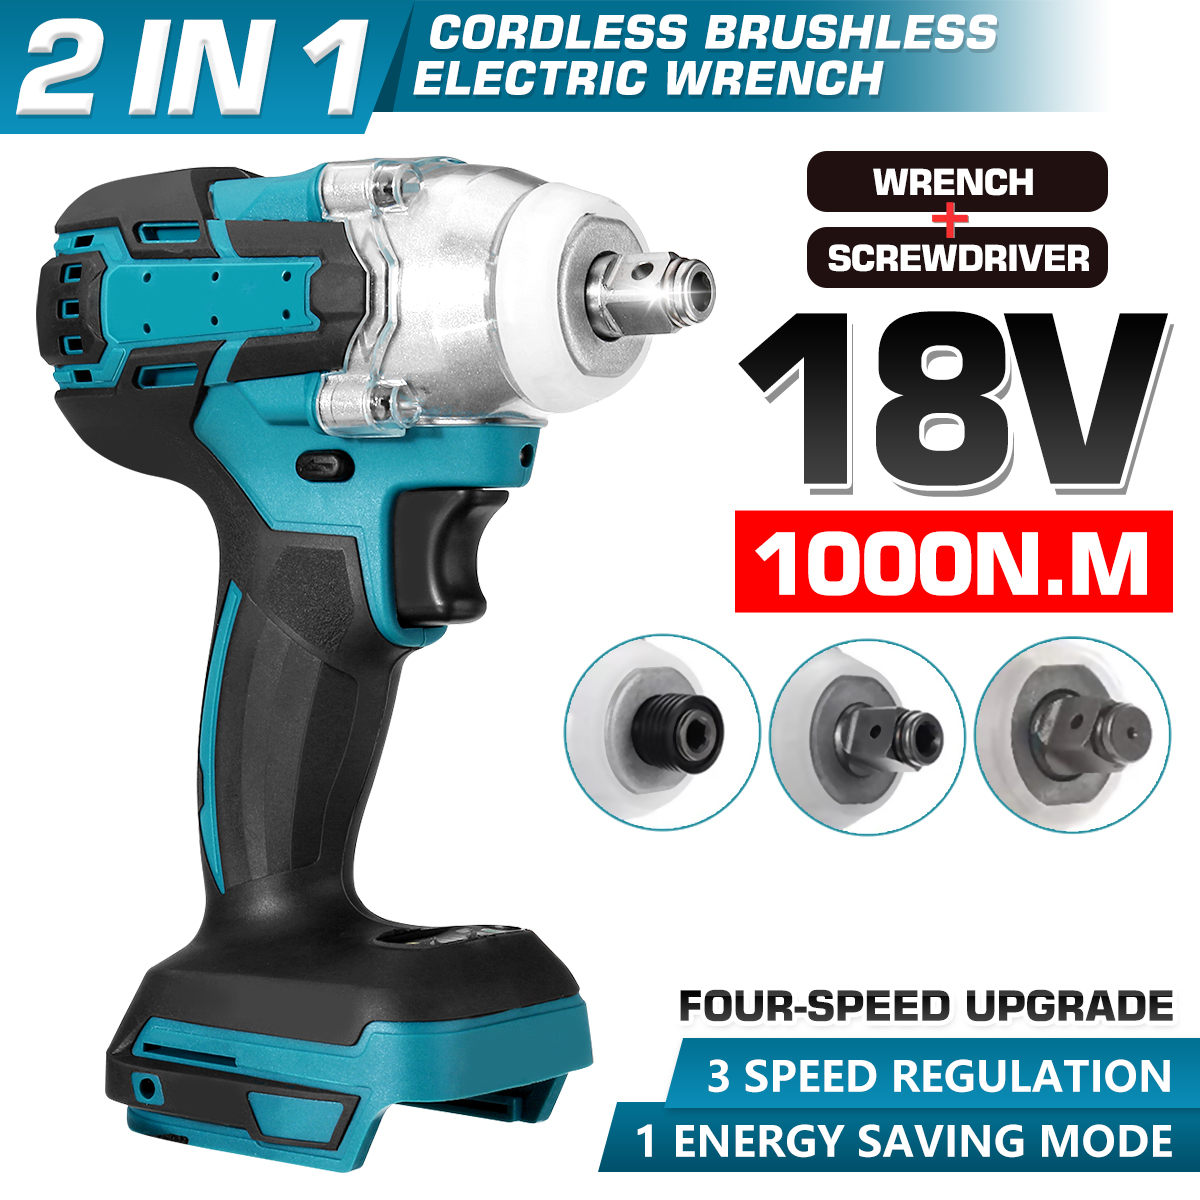 Upgrade-4-Speed-Brushless-Cordless-Electric-Impact-Wrench-Rechargeable-12-inch-Wrench-Power-Tools-fo-1853856-2